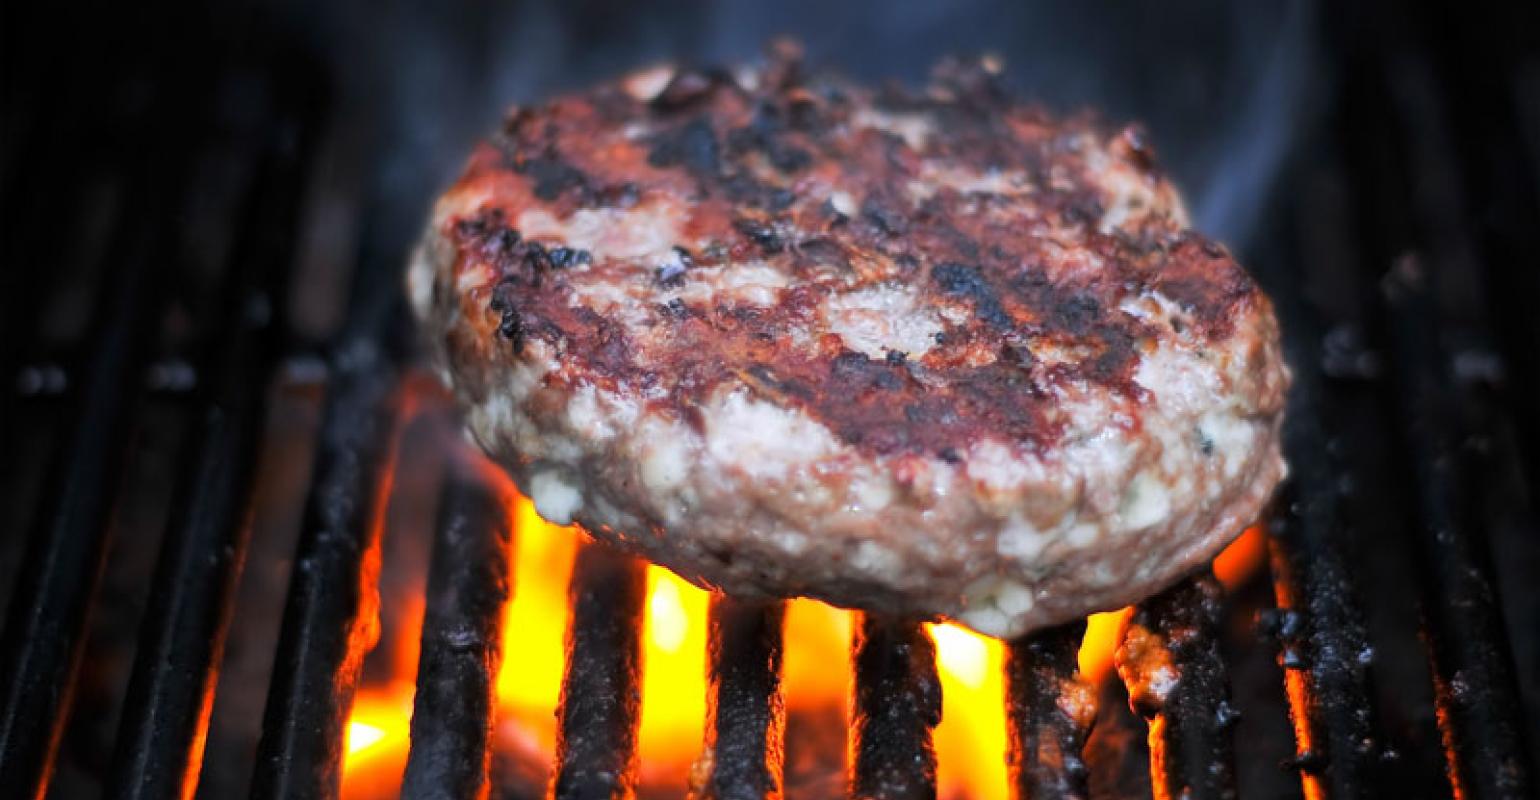 what is charbroiled burgers?